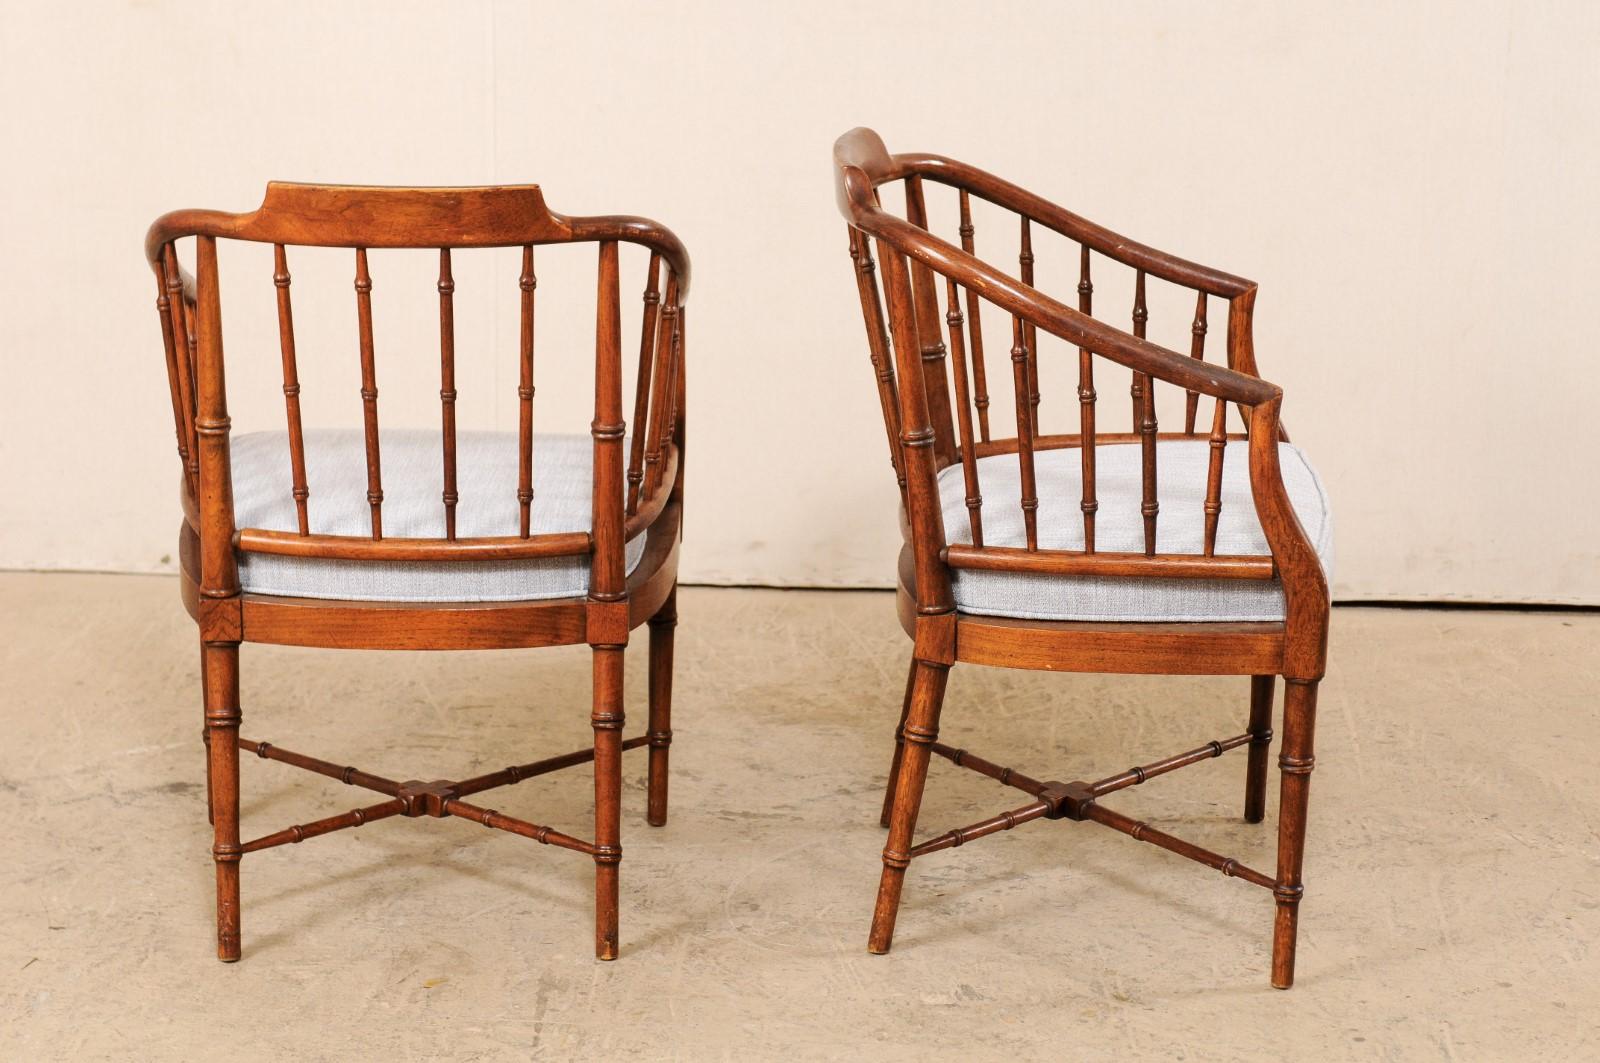 20th Century Pair of Midcentury American Faux-Bamboo Chairs